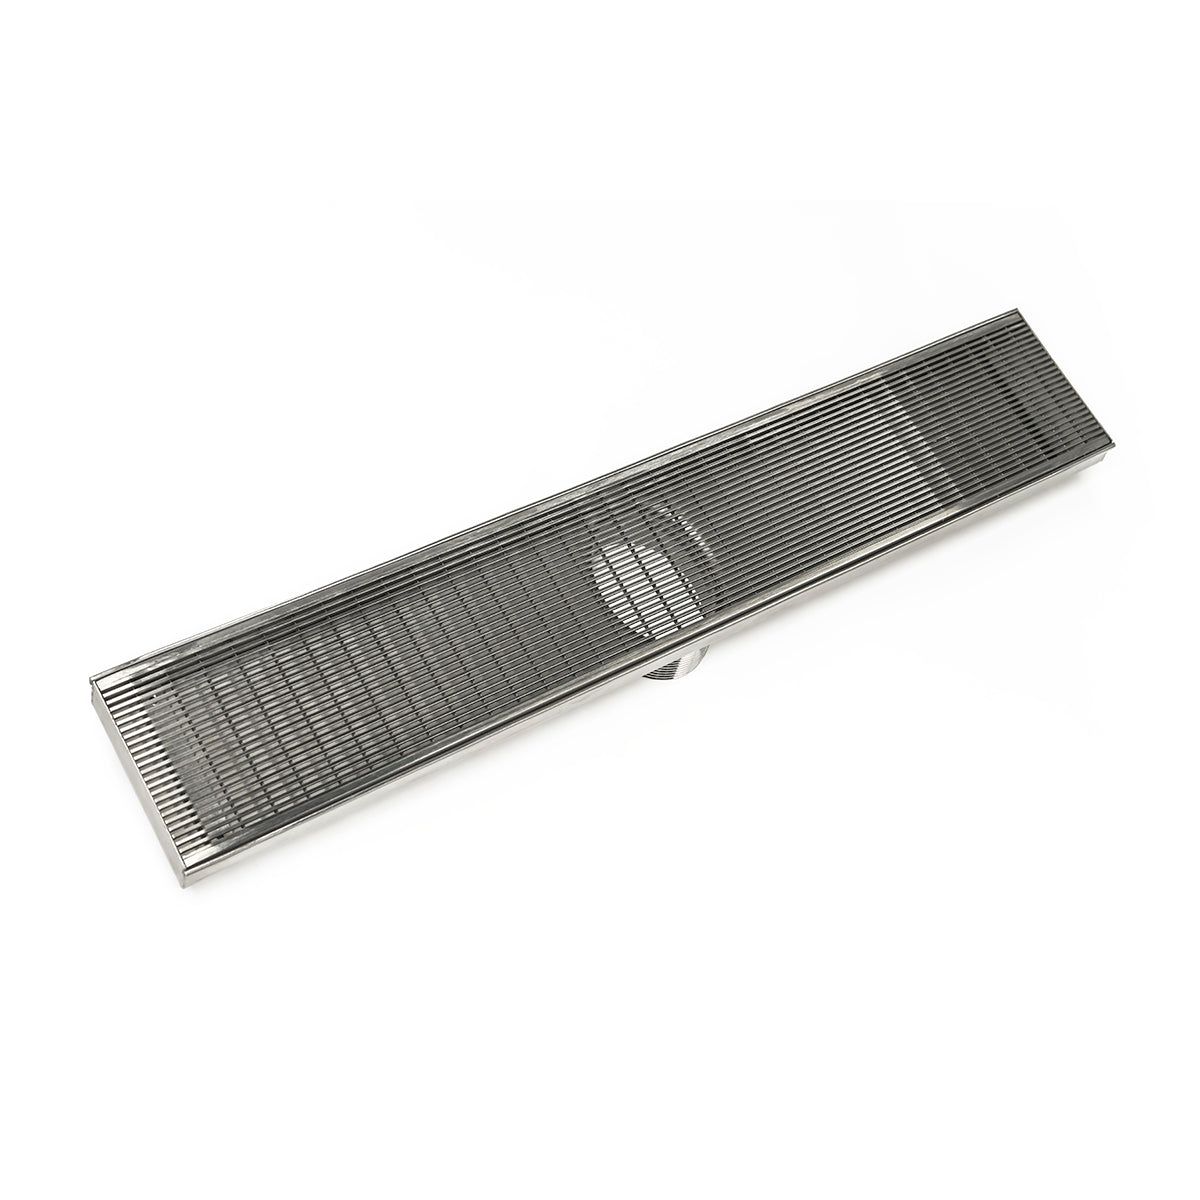 Infinity Drain 36" FX Series High Flow Fixed Length Linear Drain Kit with Wedge Wire Grate with ABS Drain Body